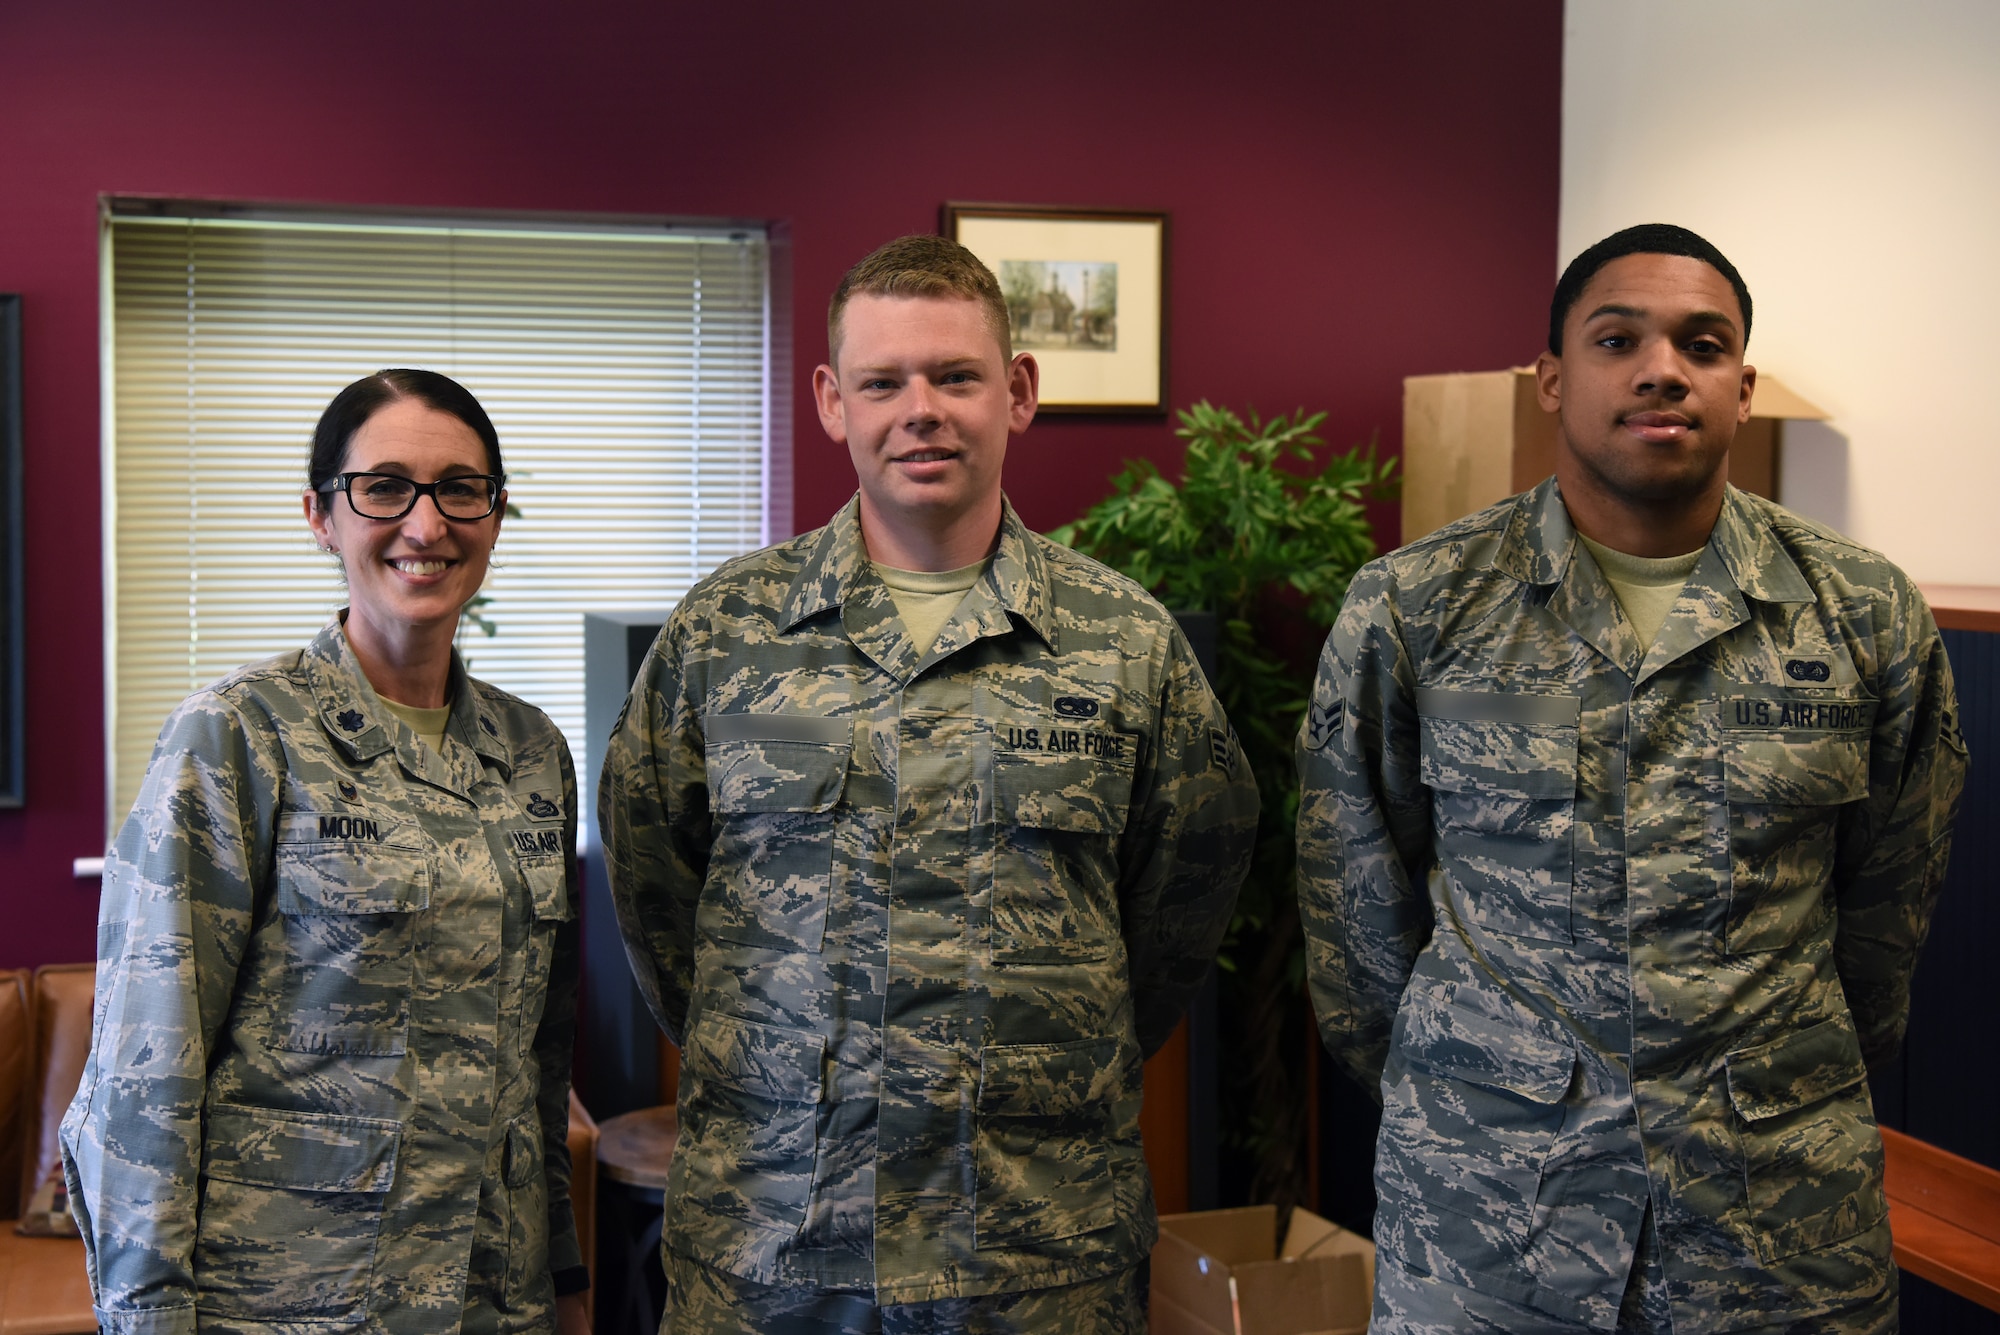 Lt. Col. Kelli R. Moon, commander of the 48th Force Support Squadron, poses with the two winning Airmen at the Airman & Family Readiness Center as part of the 48th Force Support Squadron's "You Got Served" events at Royal Air Force Lakenheath, England, May 8, 2018. During the event Lt. Col. Moon and civilians at the 48th Force Support Squadron Marketing section selected two Airmen to recieve a $10 gift card each. (U.S. Air Force Photo/ Airman 1st Class John A. Crawford)